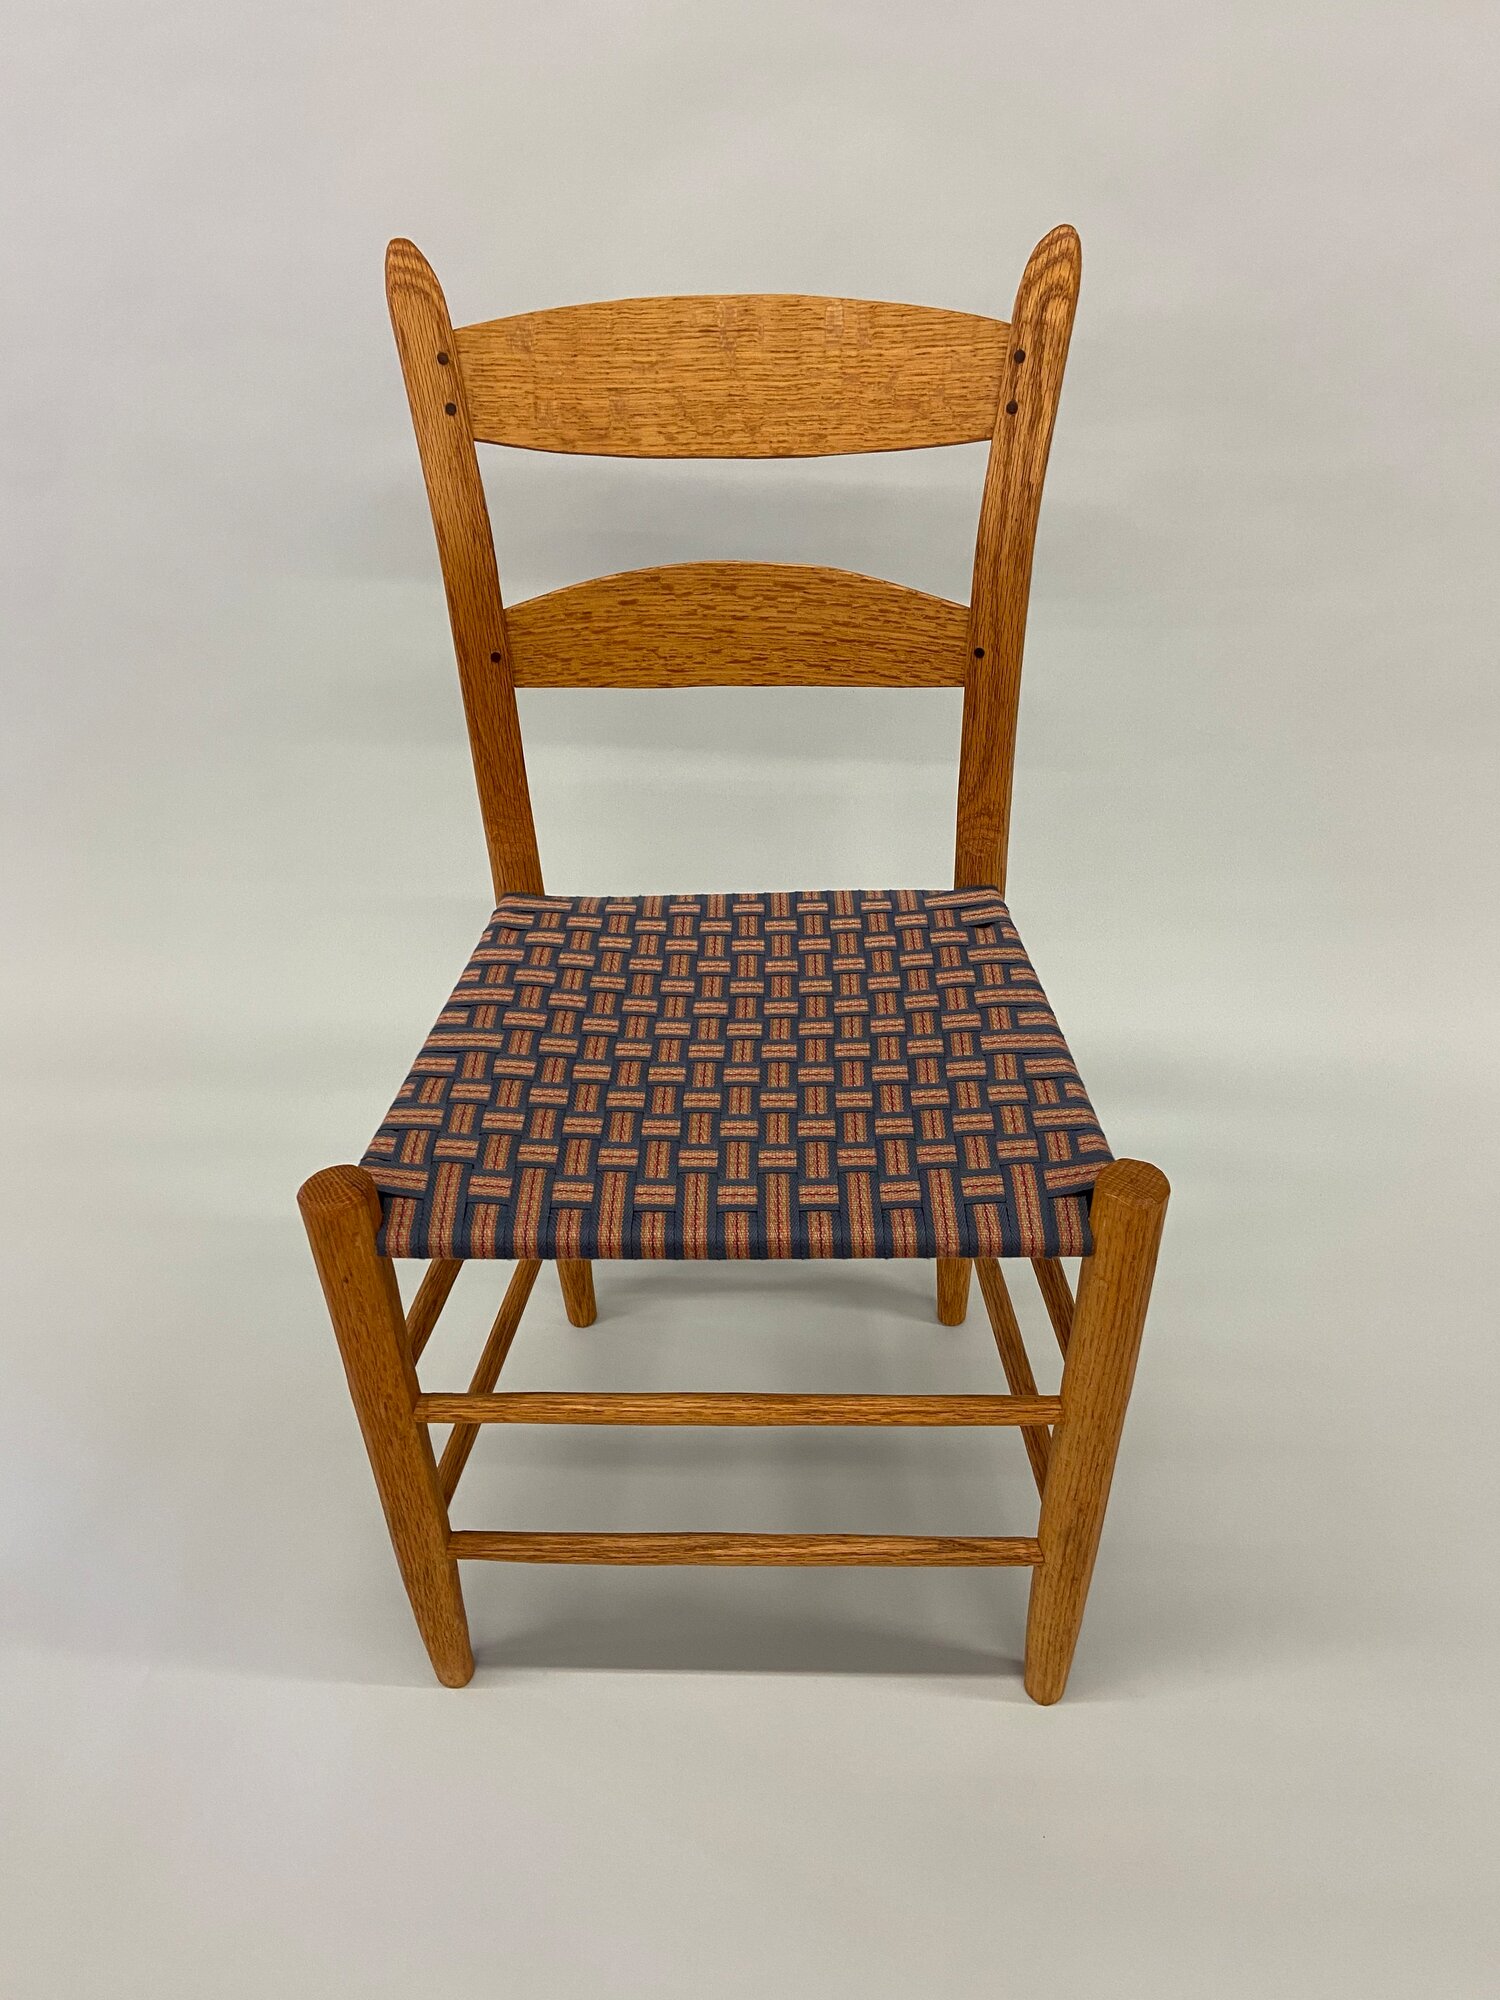 Shaker tape chair Dillehay SRCCC 2